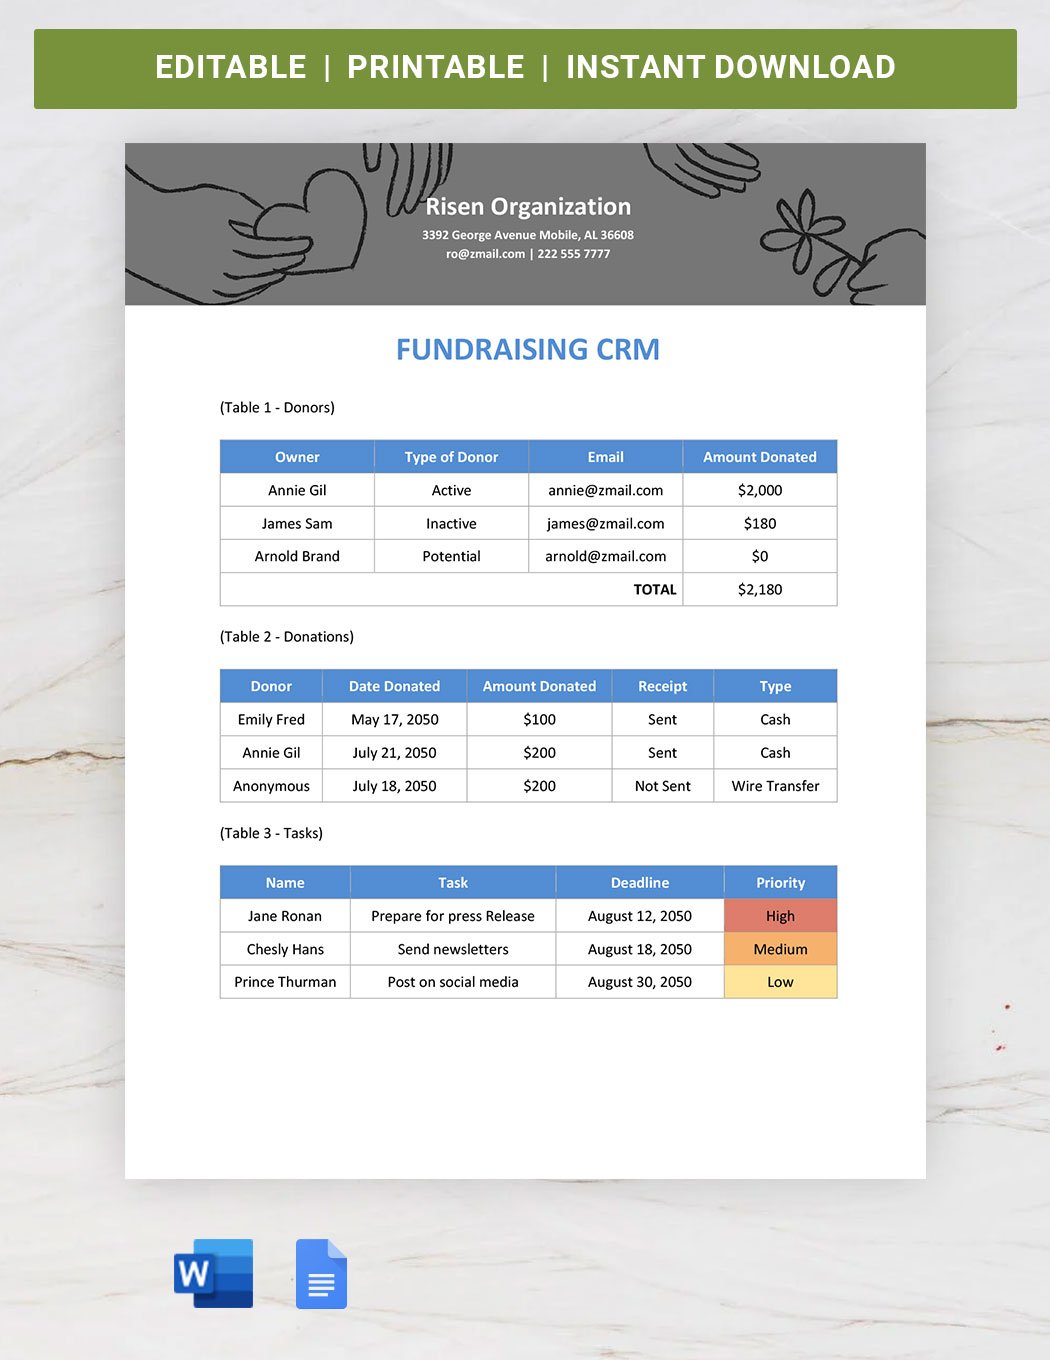 Fundraising CRM Template in Word, Google Docs